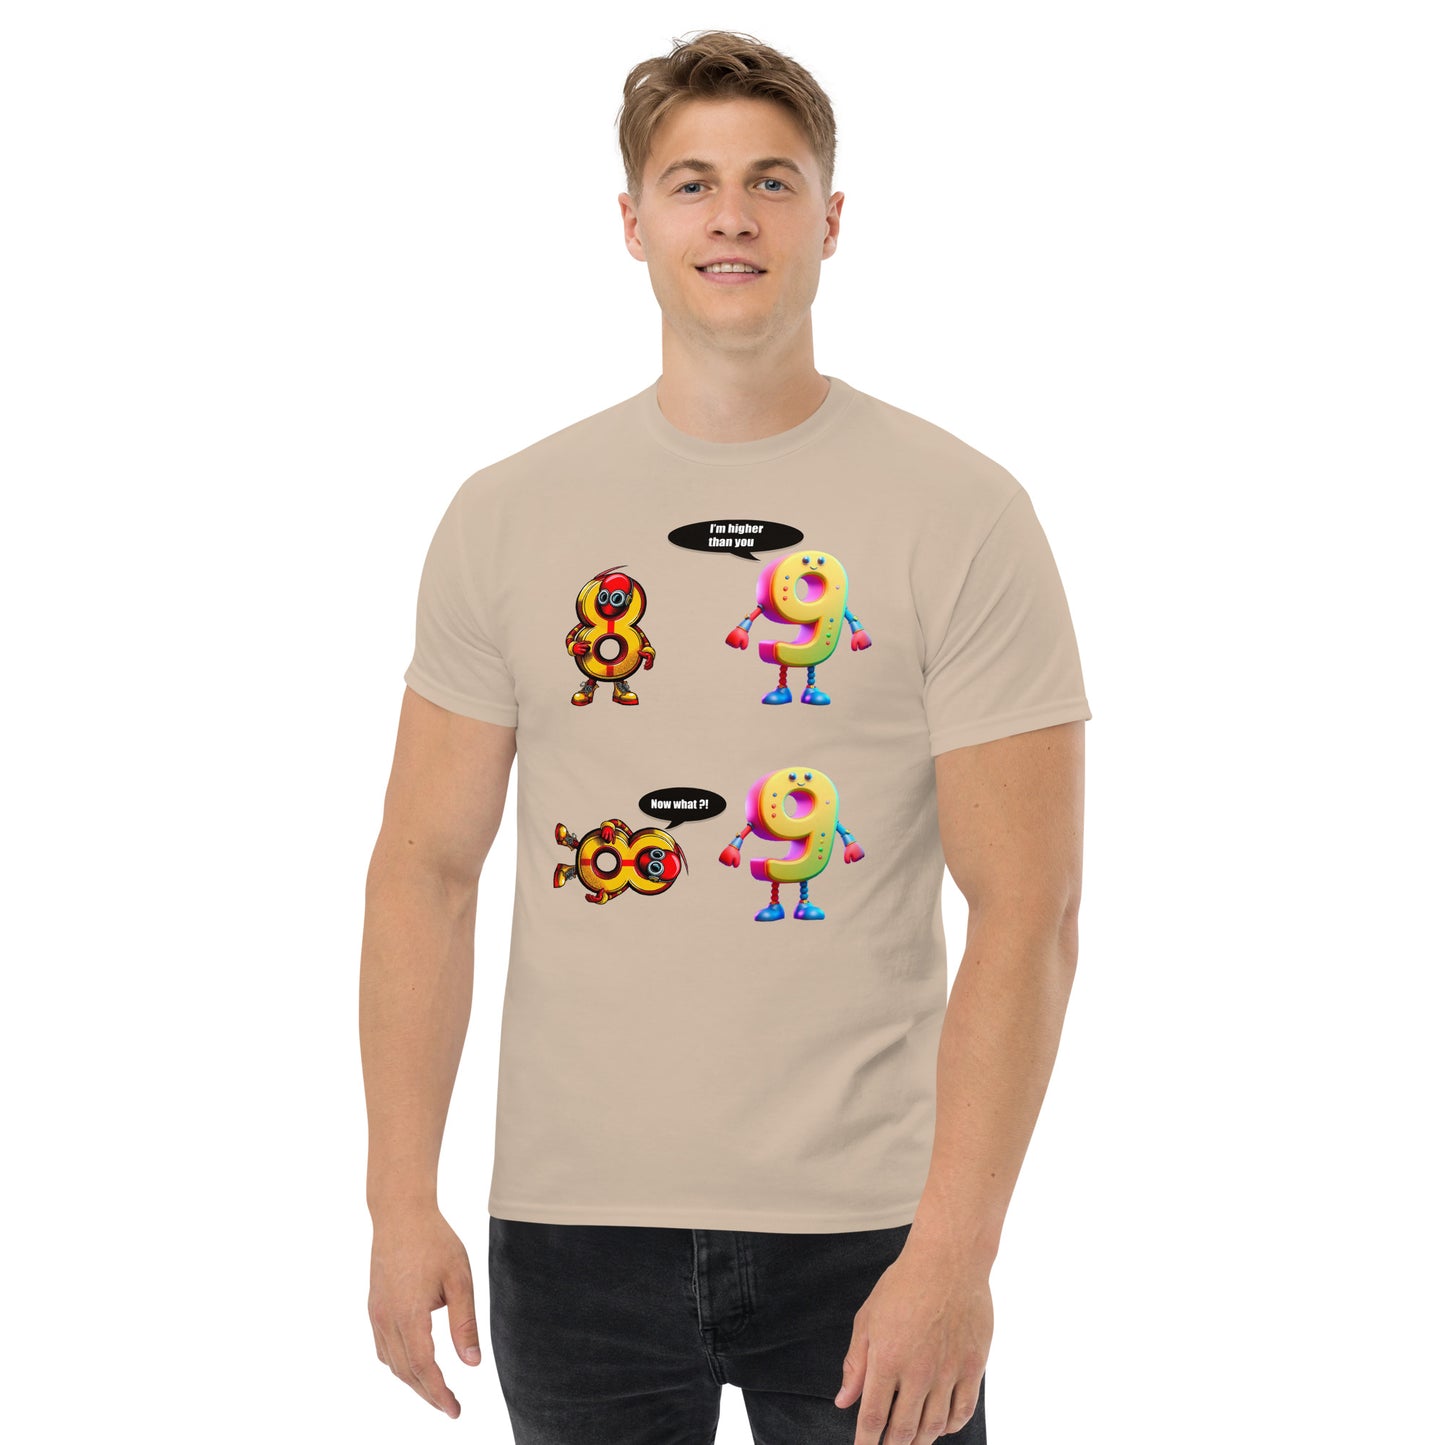 Man with sand t-shirt with picture of 8 and 9 having a discussion 